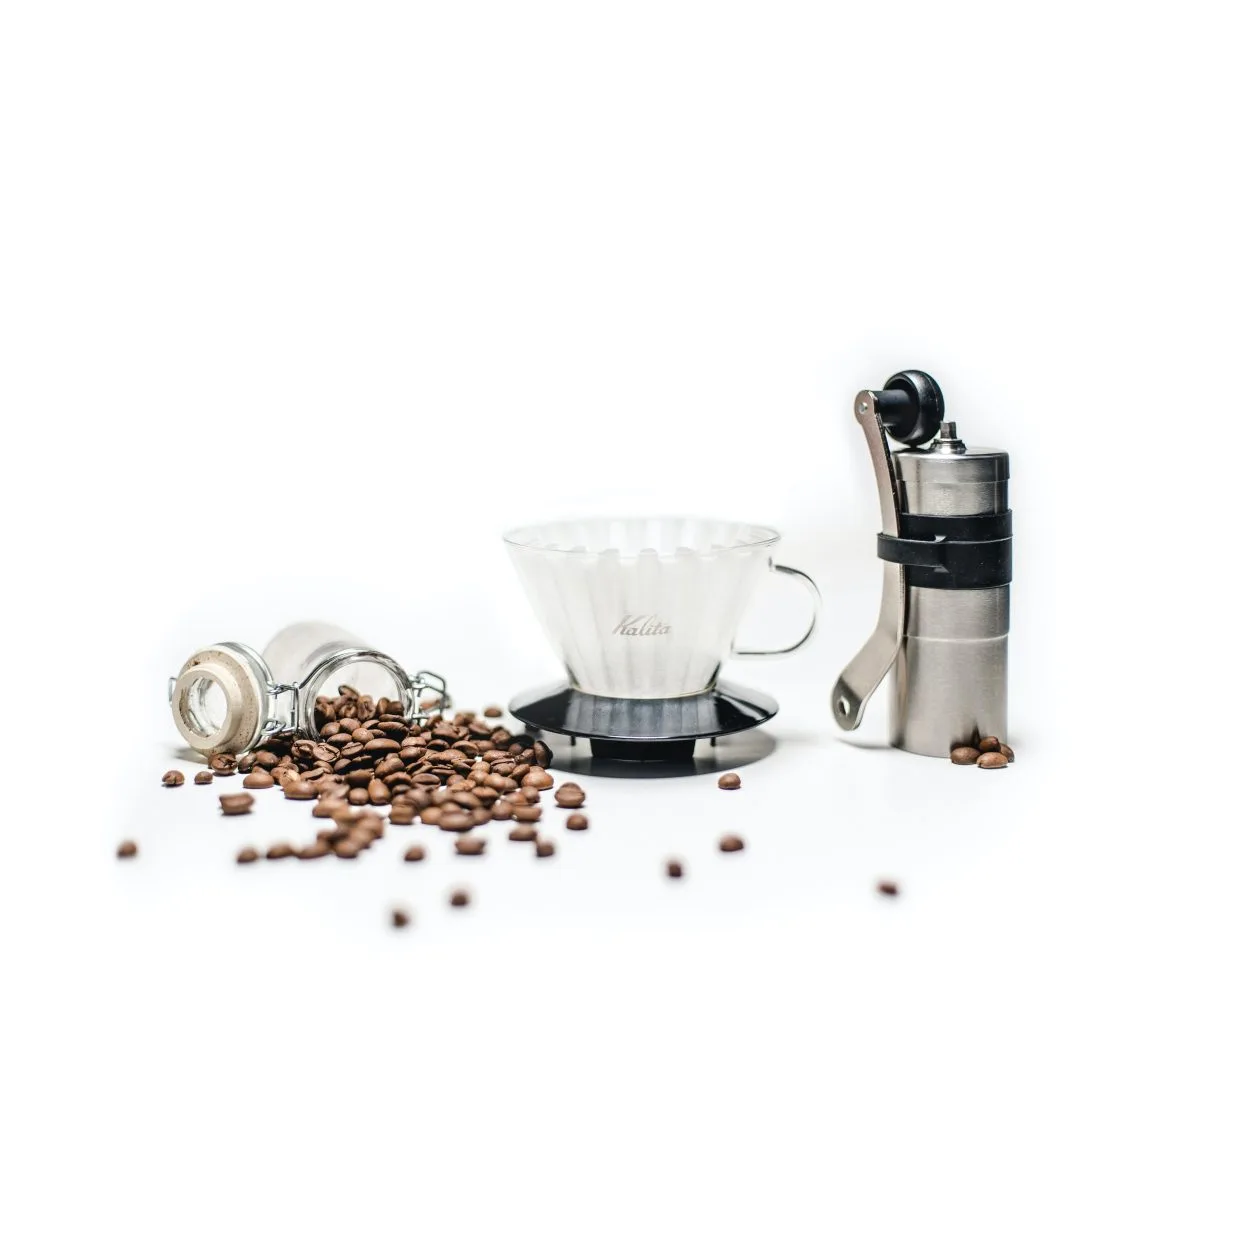 a coffee grinder next to a cup and a spilled jar of coffee beans